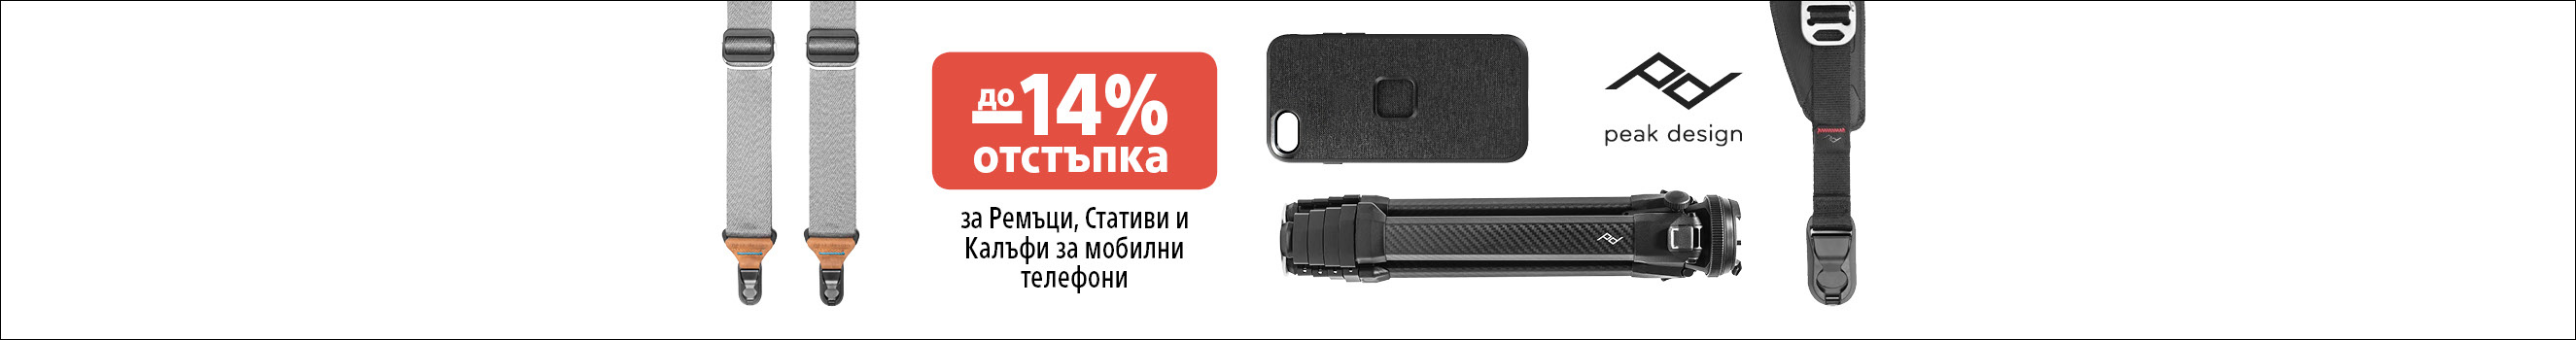  Get up to -14% Discount for Peak Design straps, tripods, mobile cases